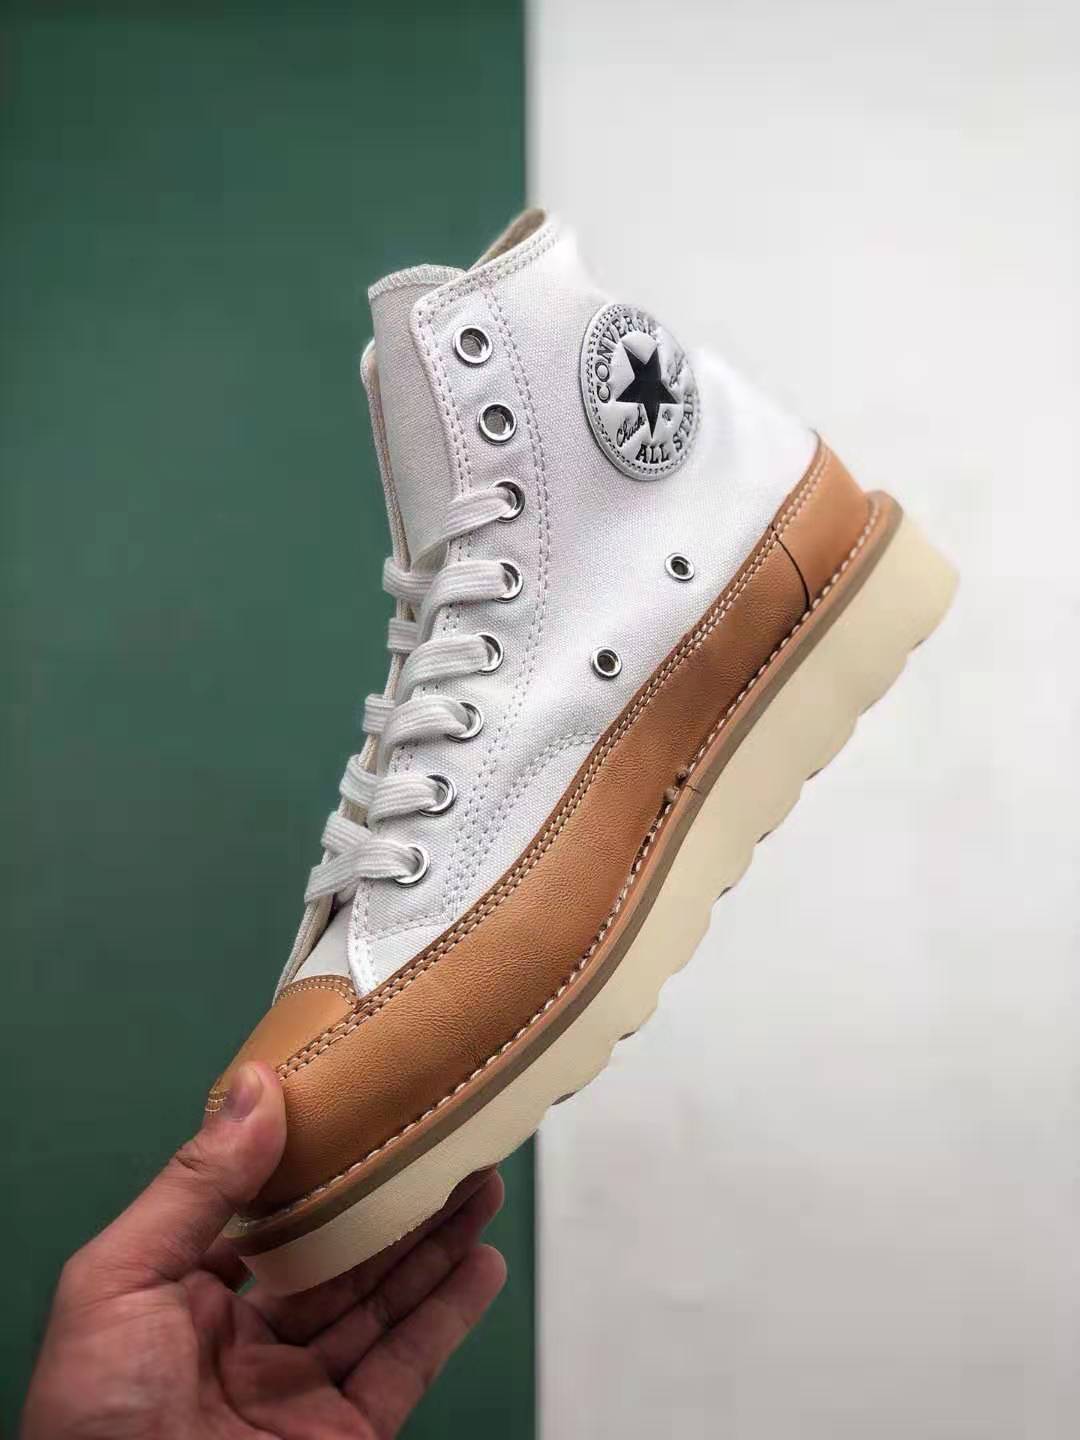 Converse Chuck 70 Hi 'Ivory' 162056C - Classic Style with a Modern Twist